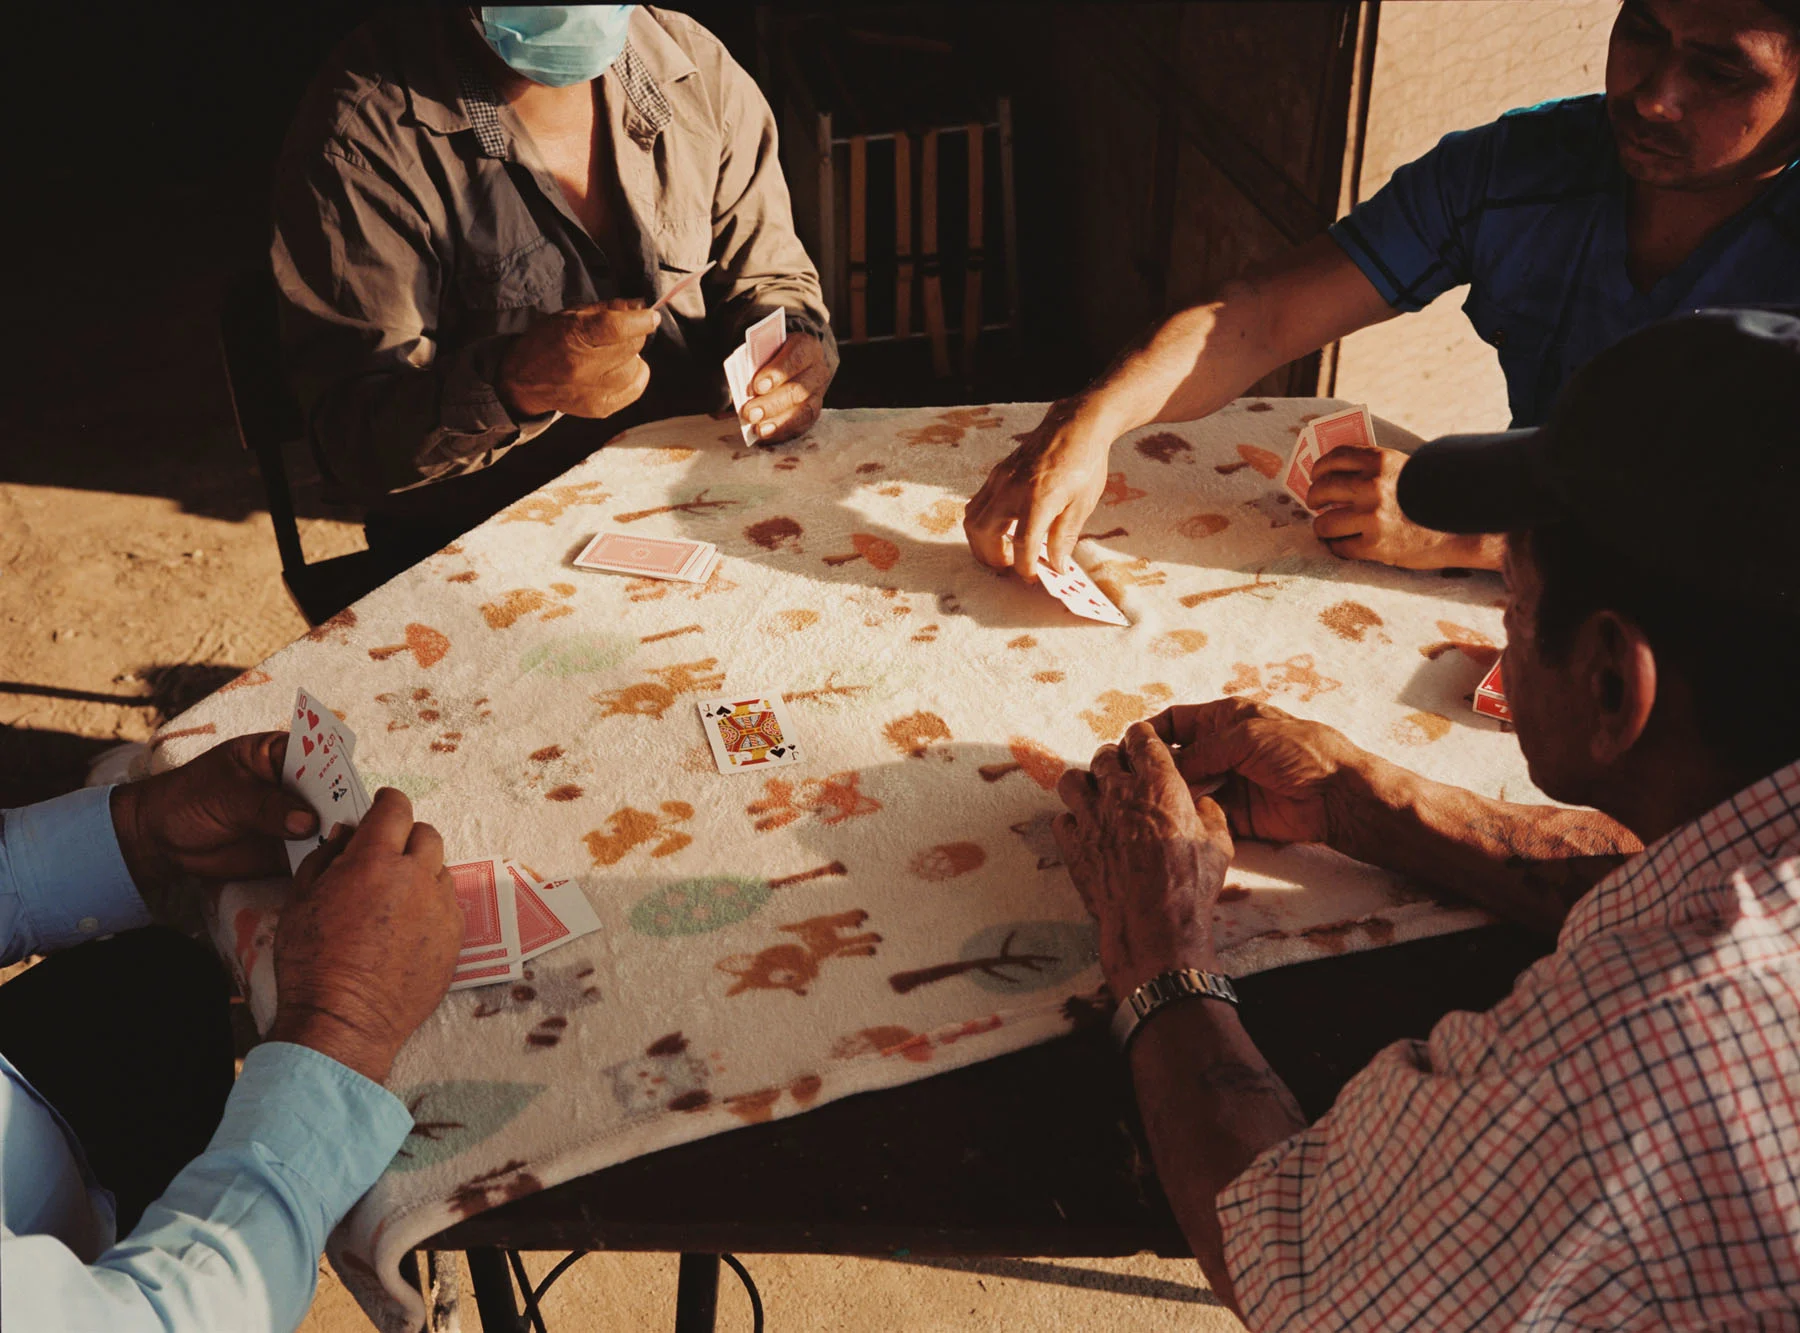 A photograph of four men playing a game of cards on a table. A warm golden light covers the scene.